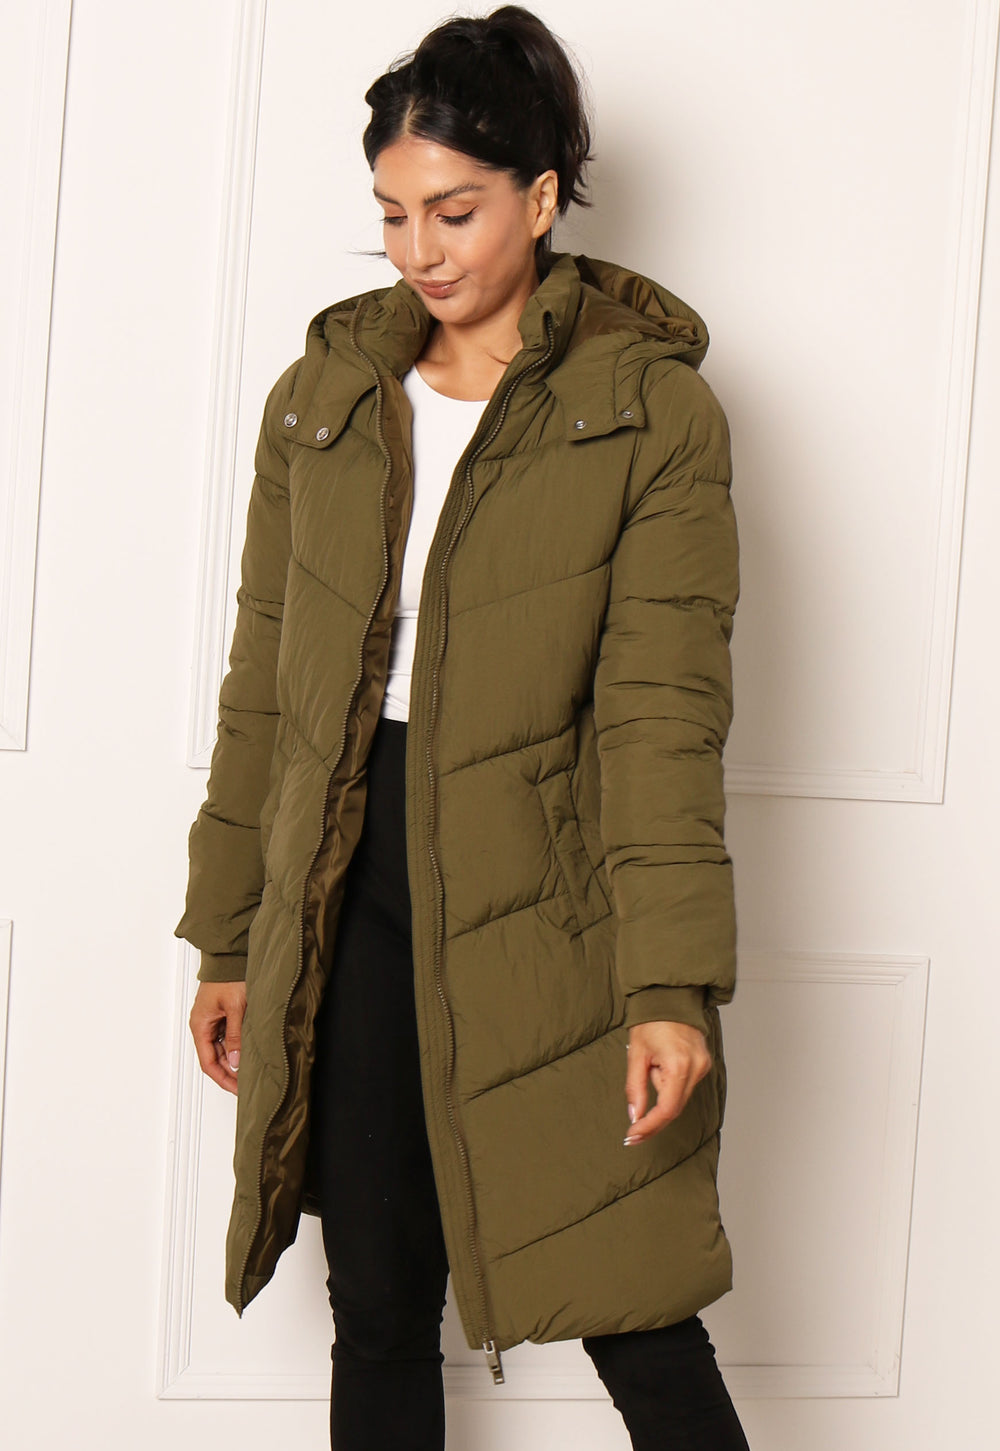 PIECES Jamilla Chevron Quilted Longline Hooded Puffer Coat in Khaki - One Nation Clothing